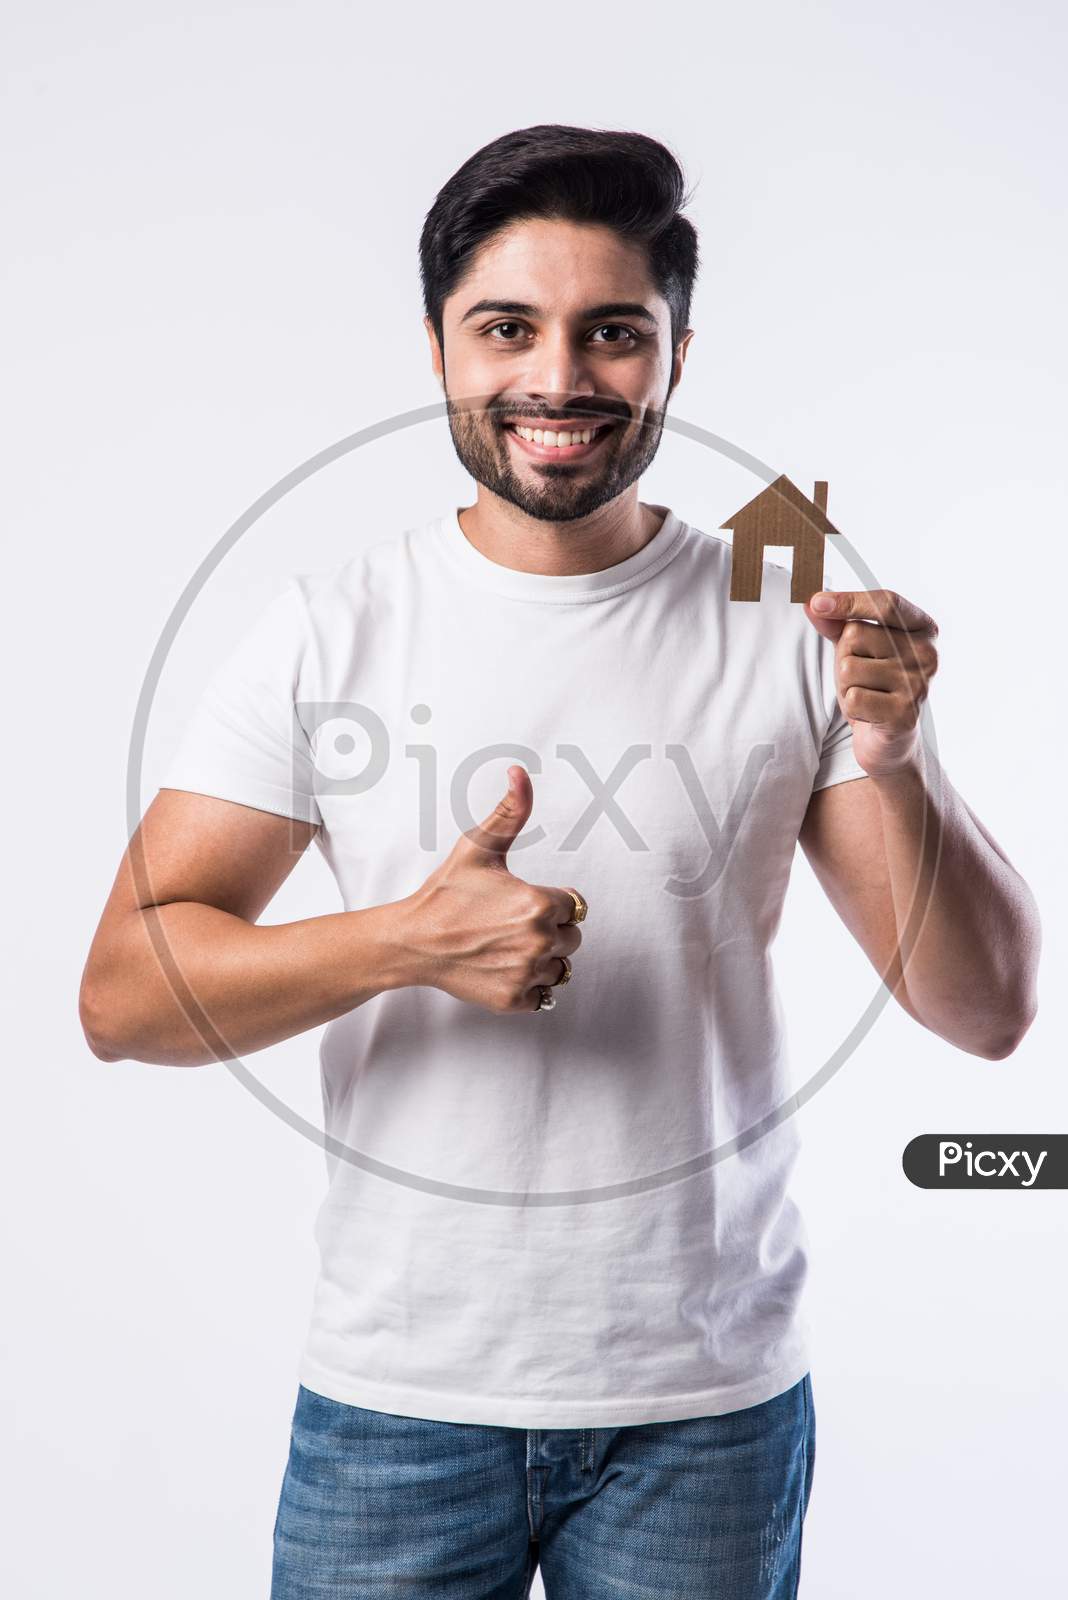 Real Estate Concept - Indian Handsome Man Holding Cut Out Of Paper House Model